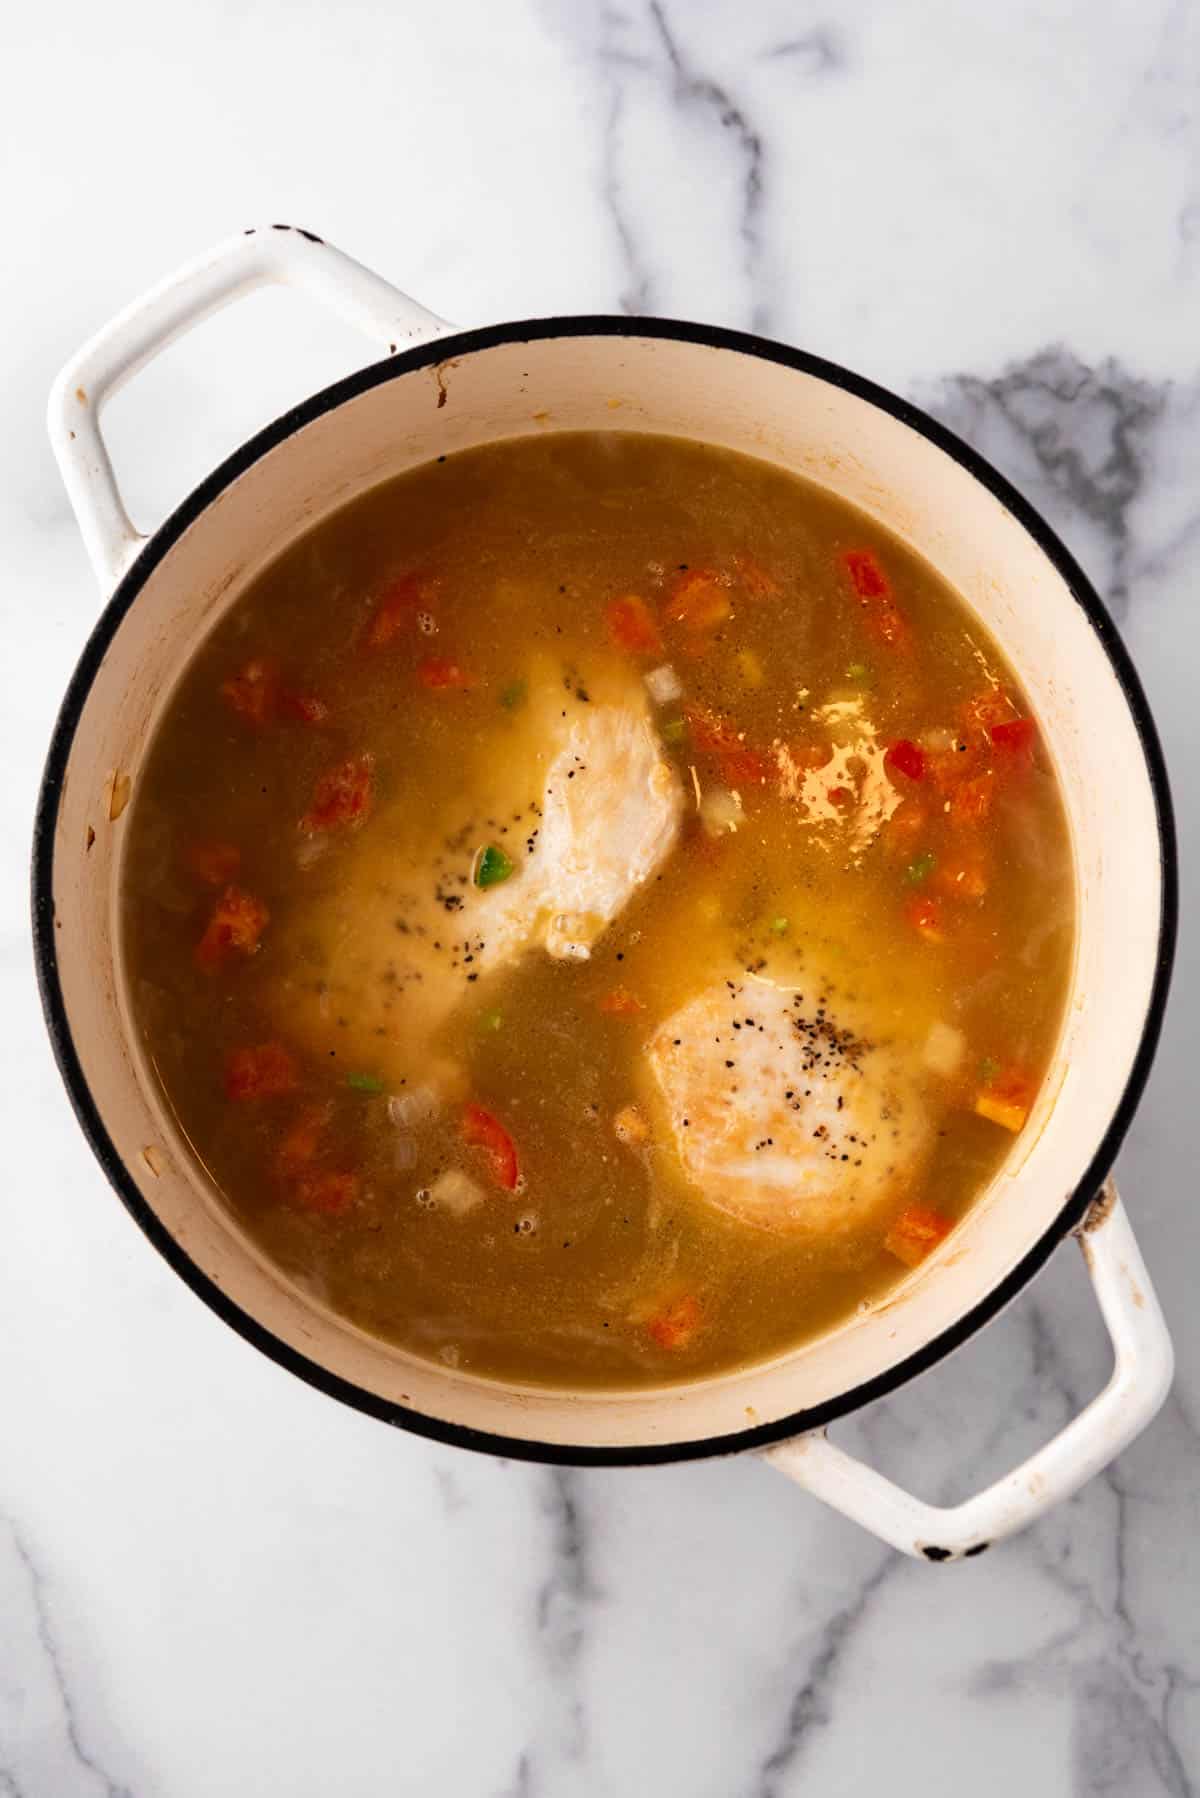 Adding chicken broth and chicken breasts to a large pot of soup ingredients.